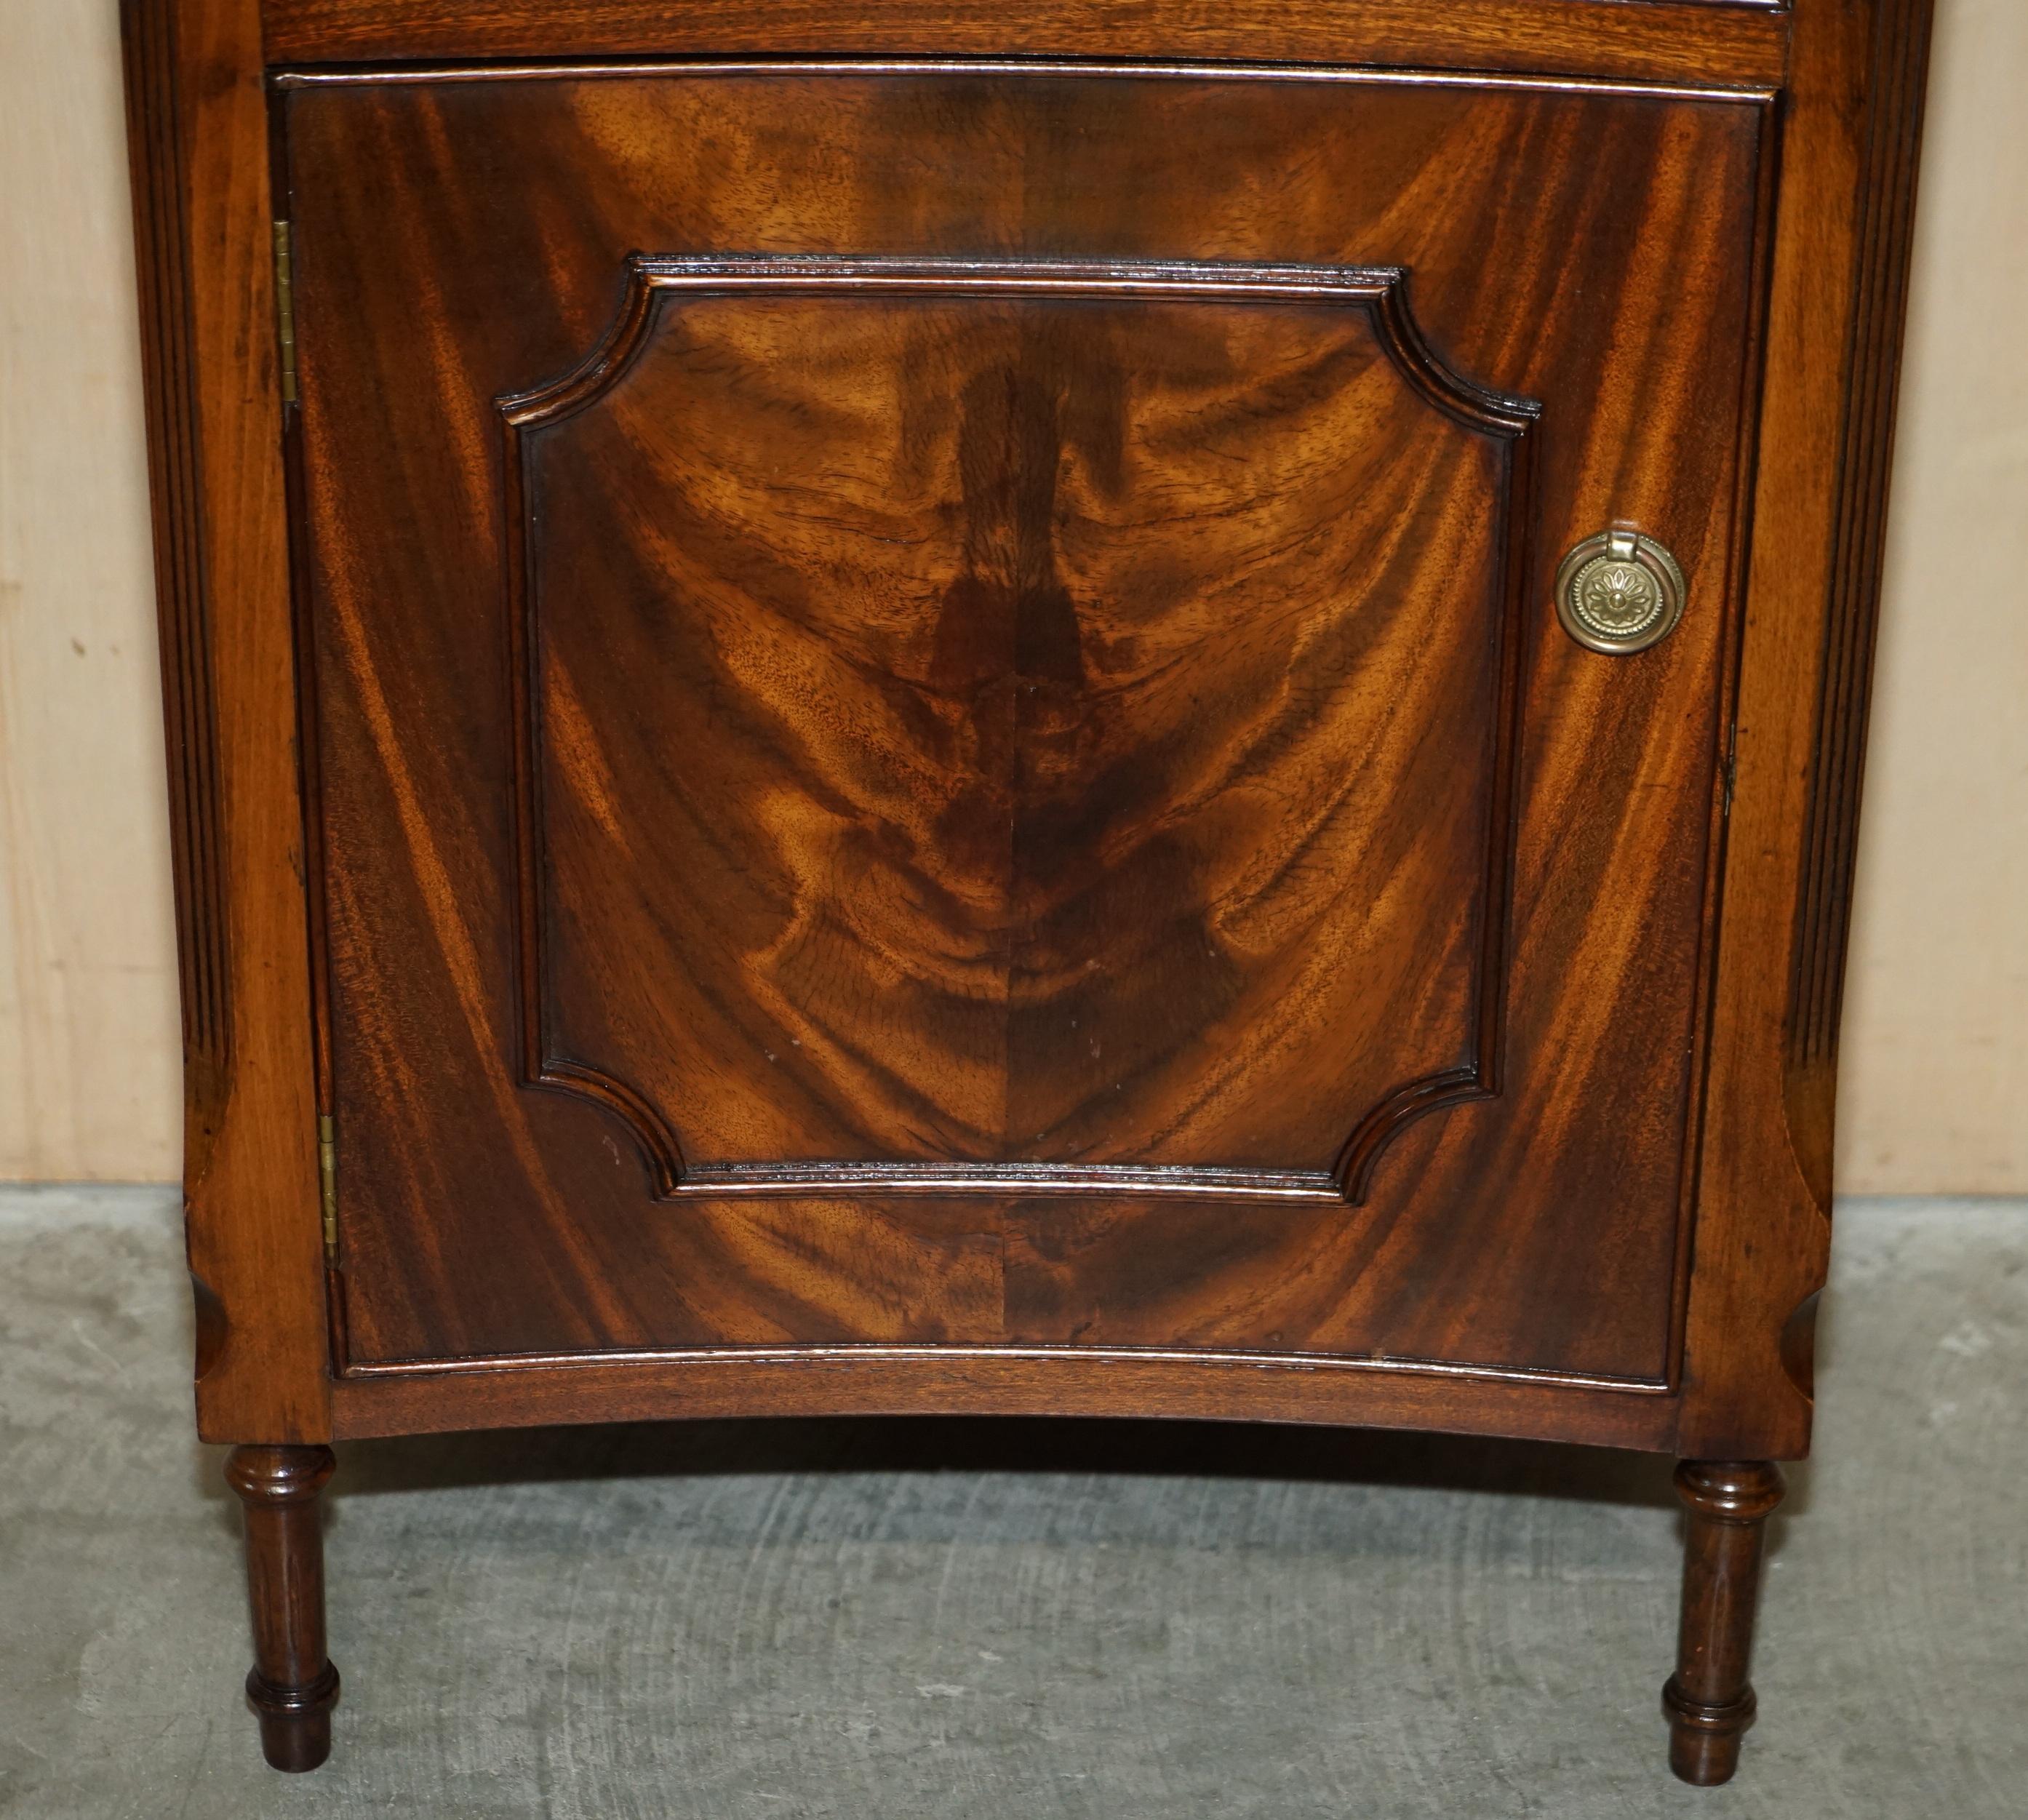 Hand-Crafted Stunning Pair of Vintage Bow Fronted Flamed Hardwood Side End Table Cupbards For Sale